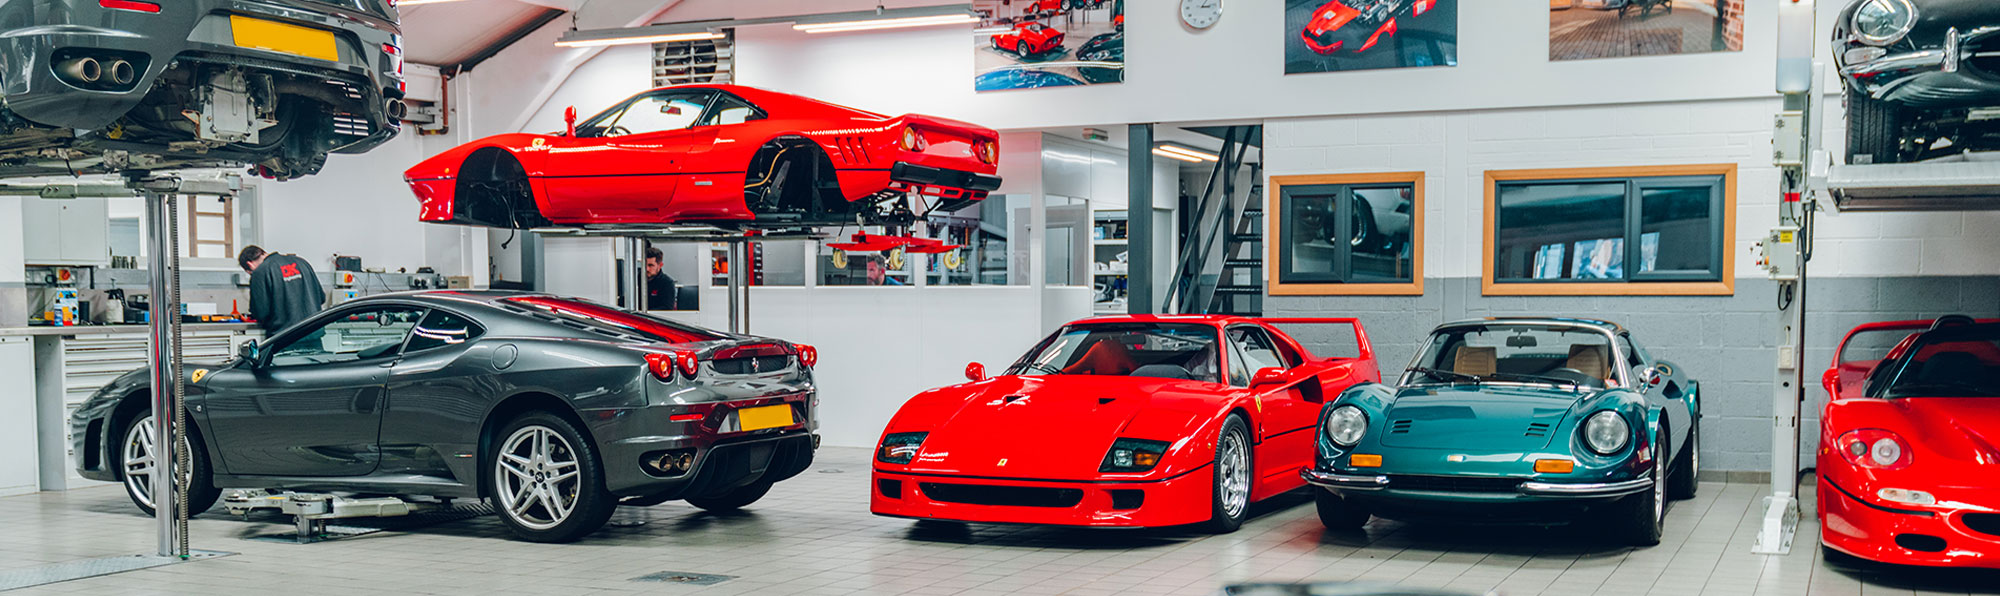 A selection of Ferraris at the DK Engineering workshop